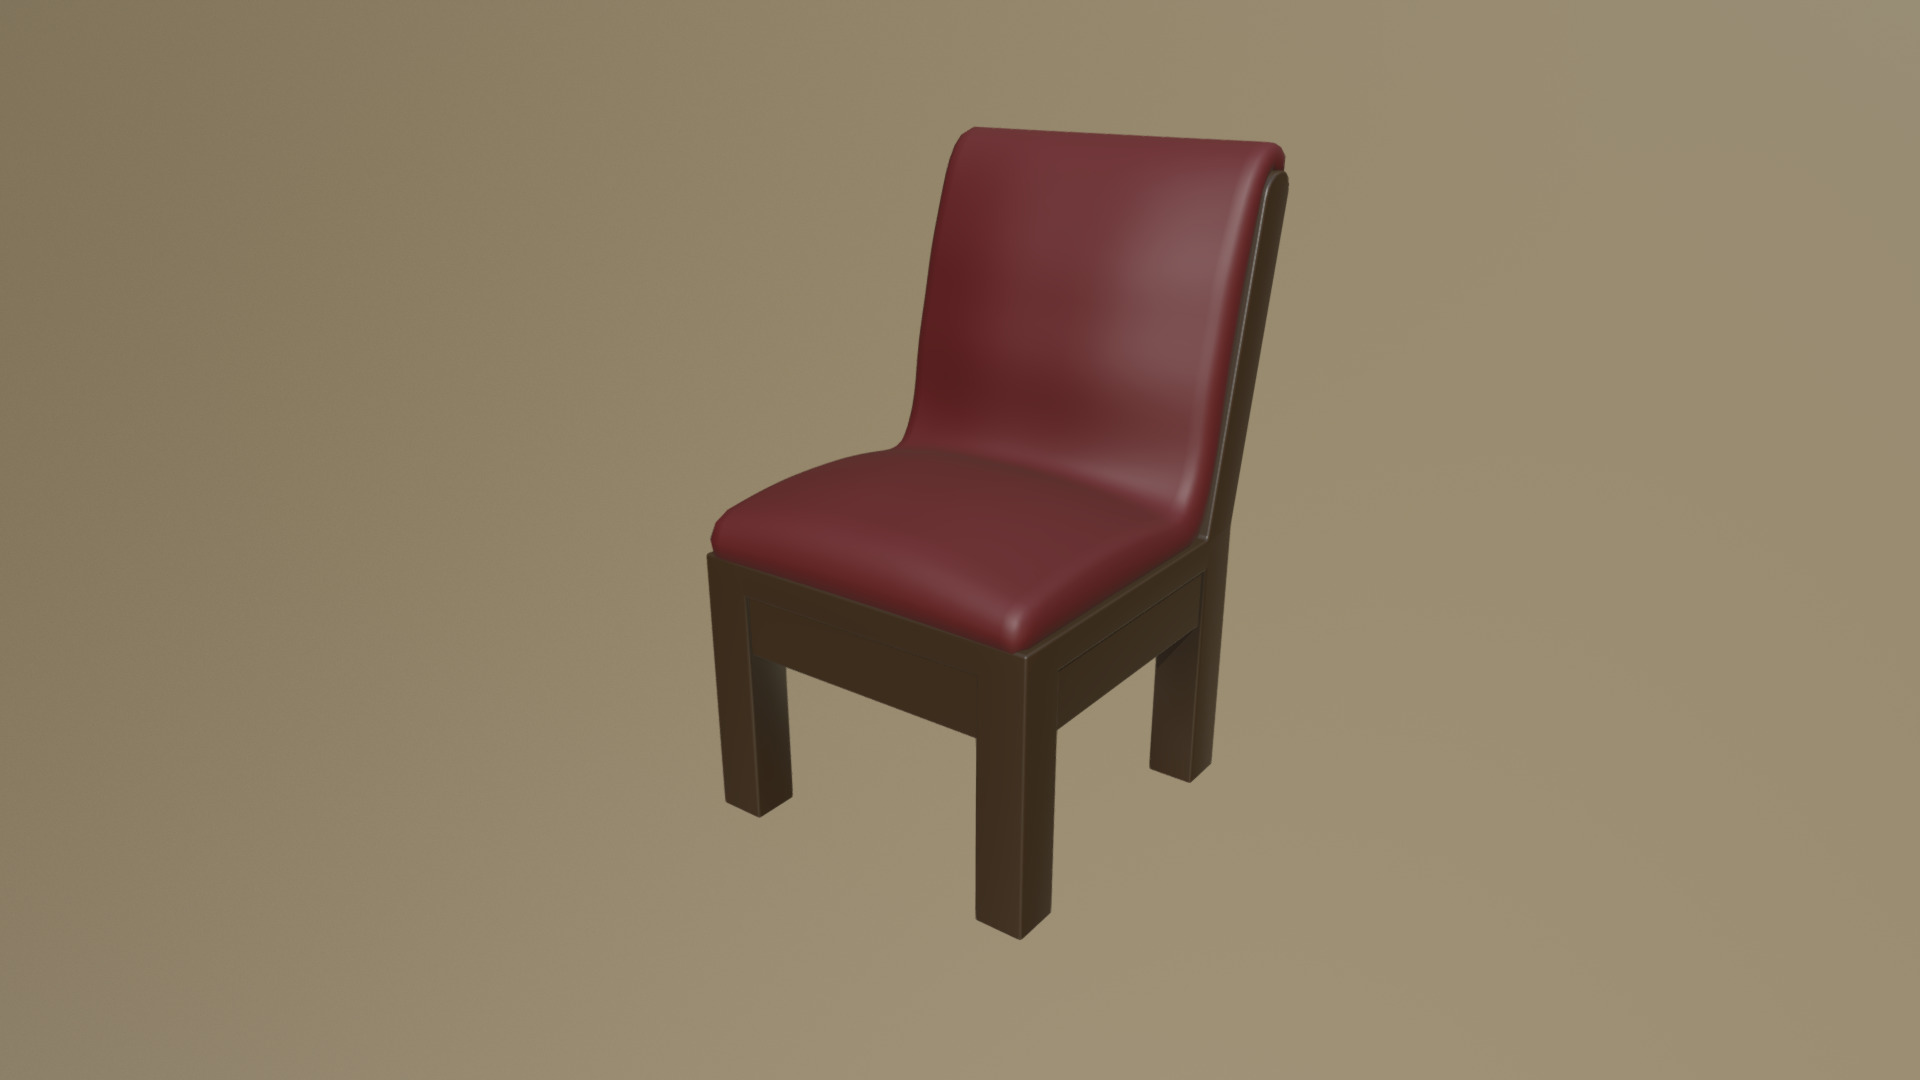 3D model Church Chair #2 V2 - This is a 3D model of the Church Chair #2 V2. The 3D model is about a red chair with a white background.